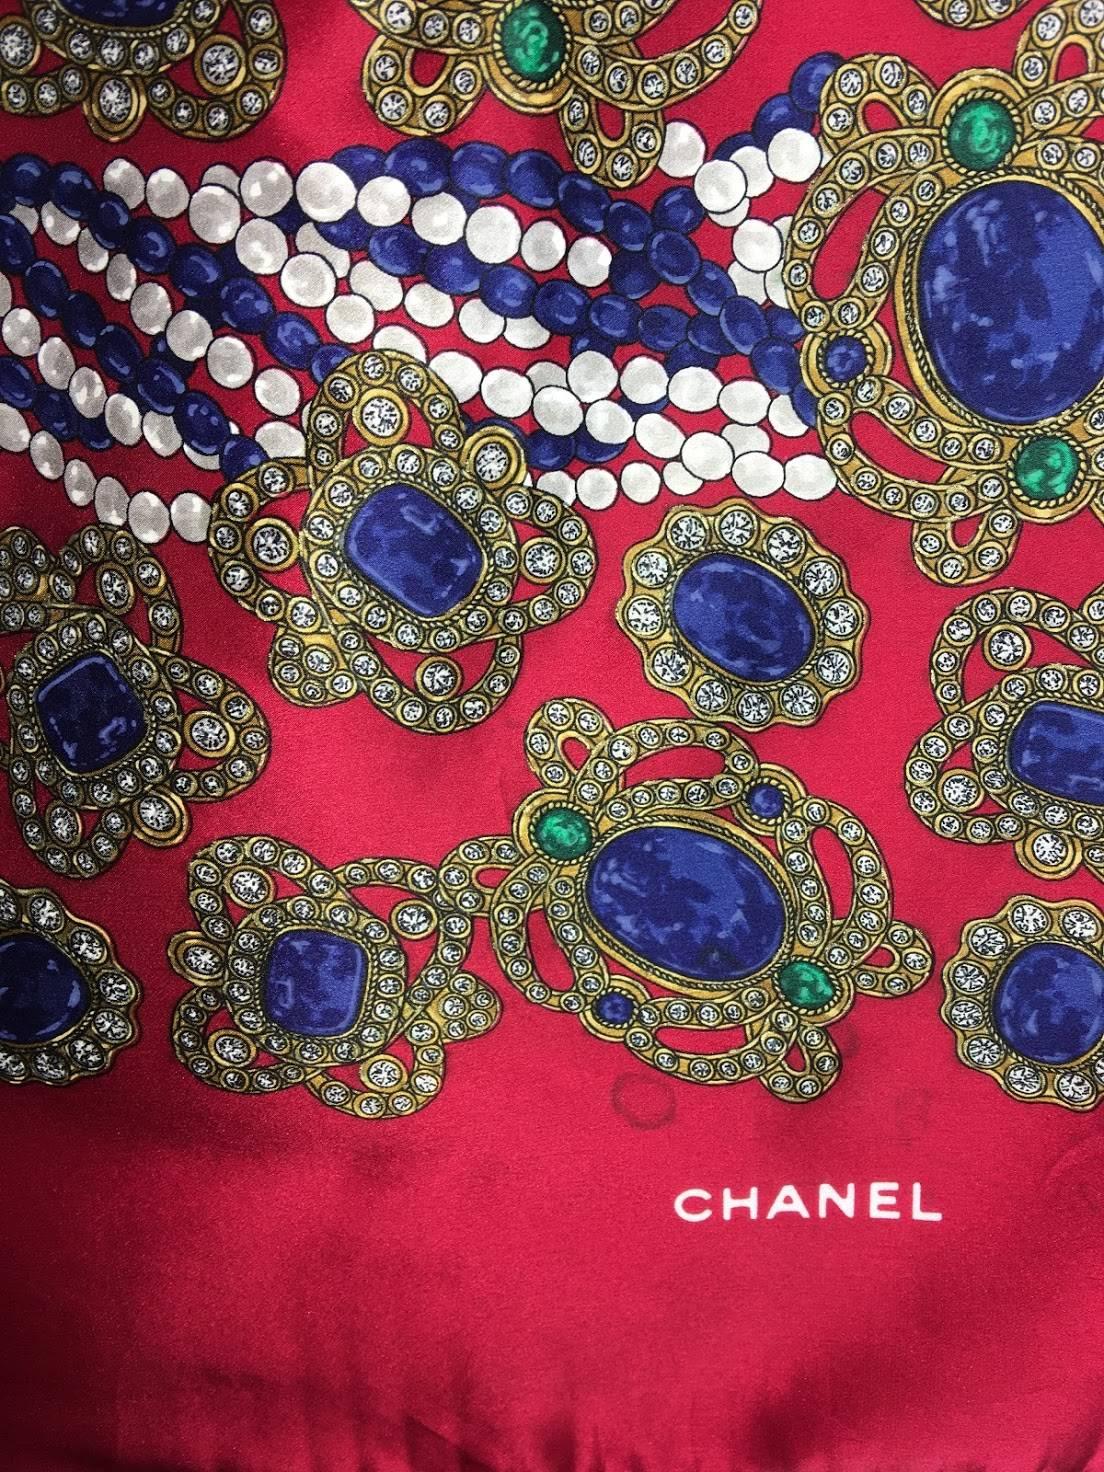 Bijoux Chanel Silk Scarf. Red background with Blue, Yellow, and White details. 